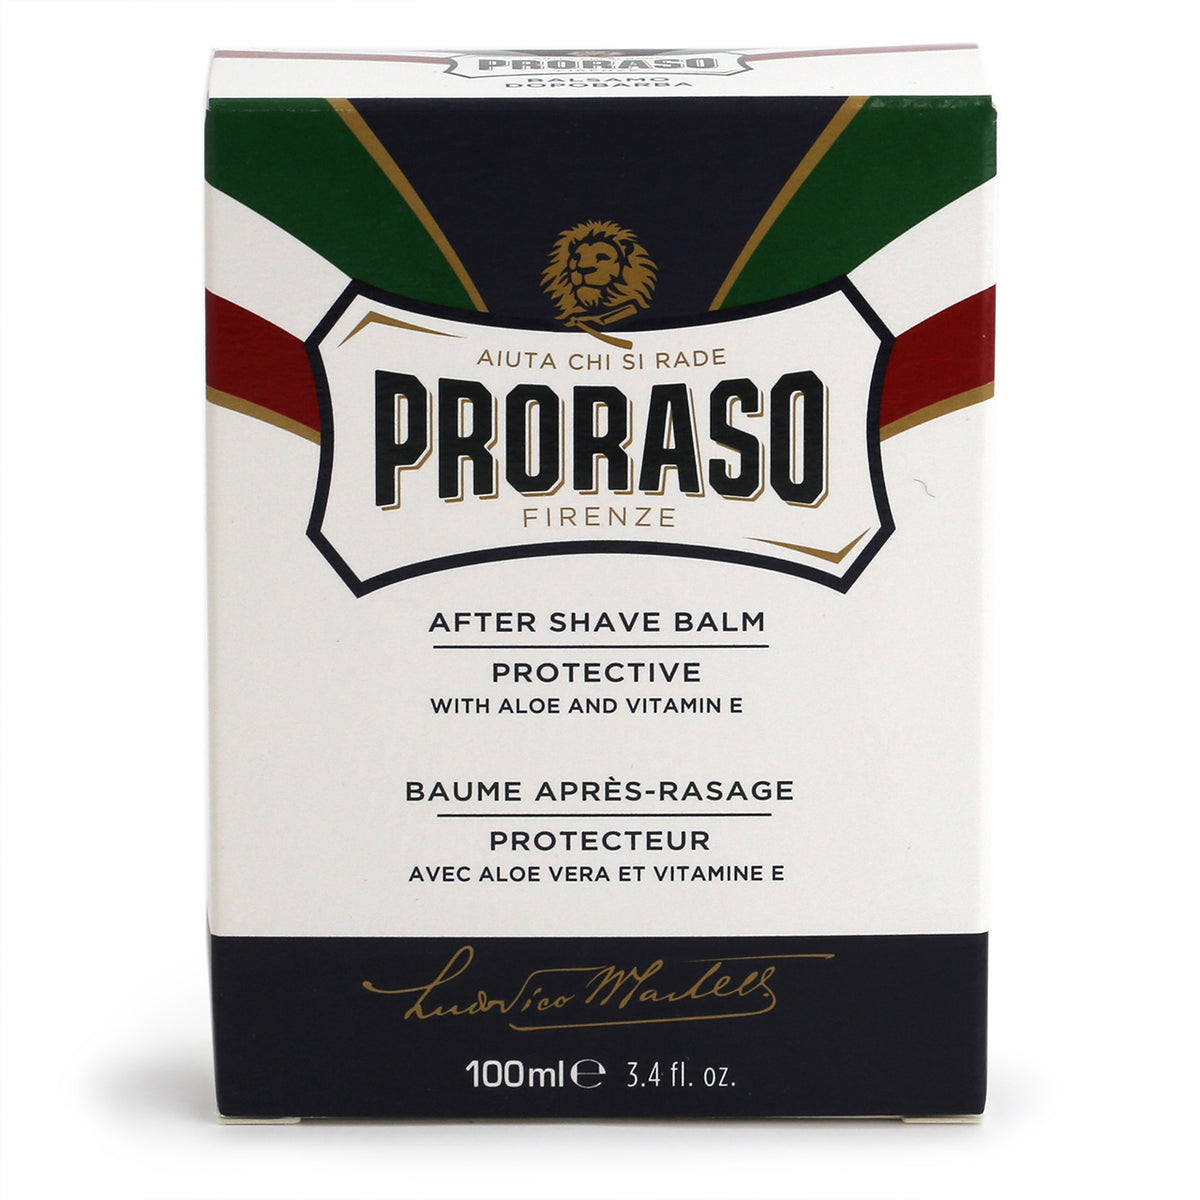 Proraso After Shave Balm - Protective - white and dark blue box